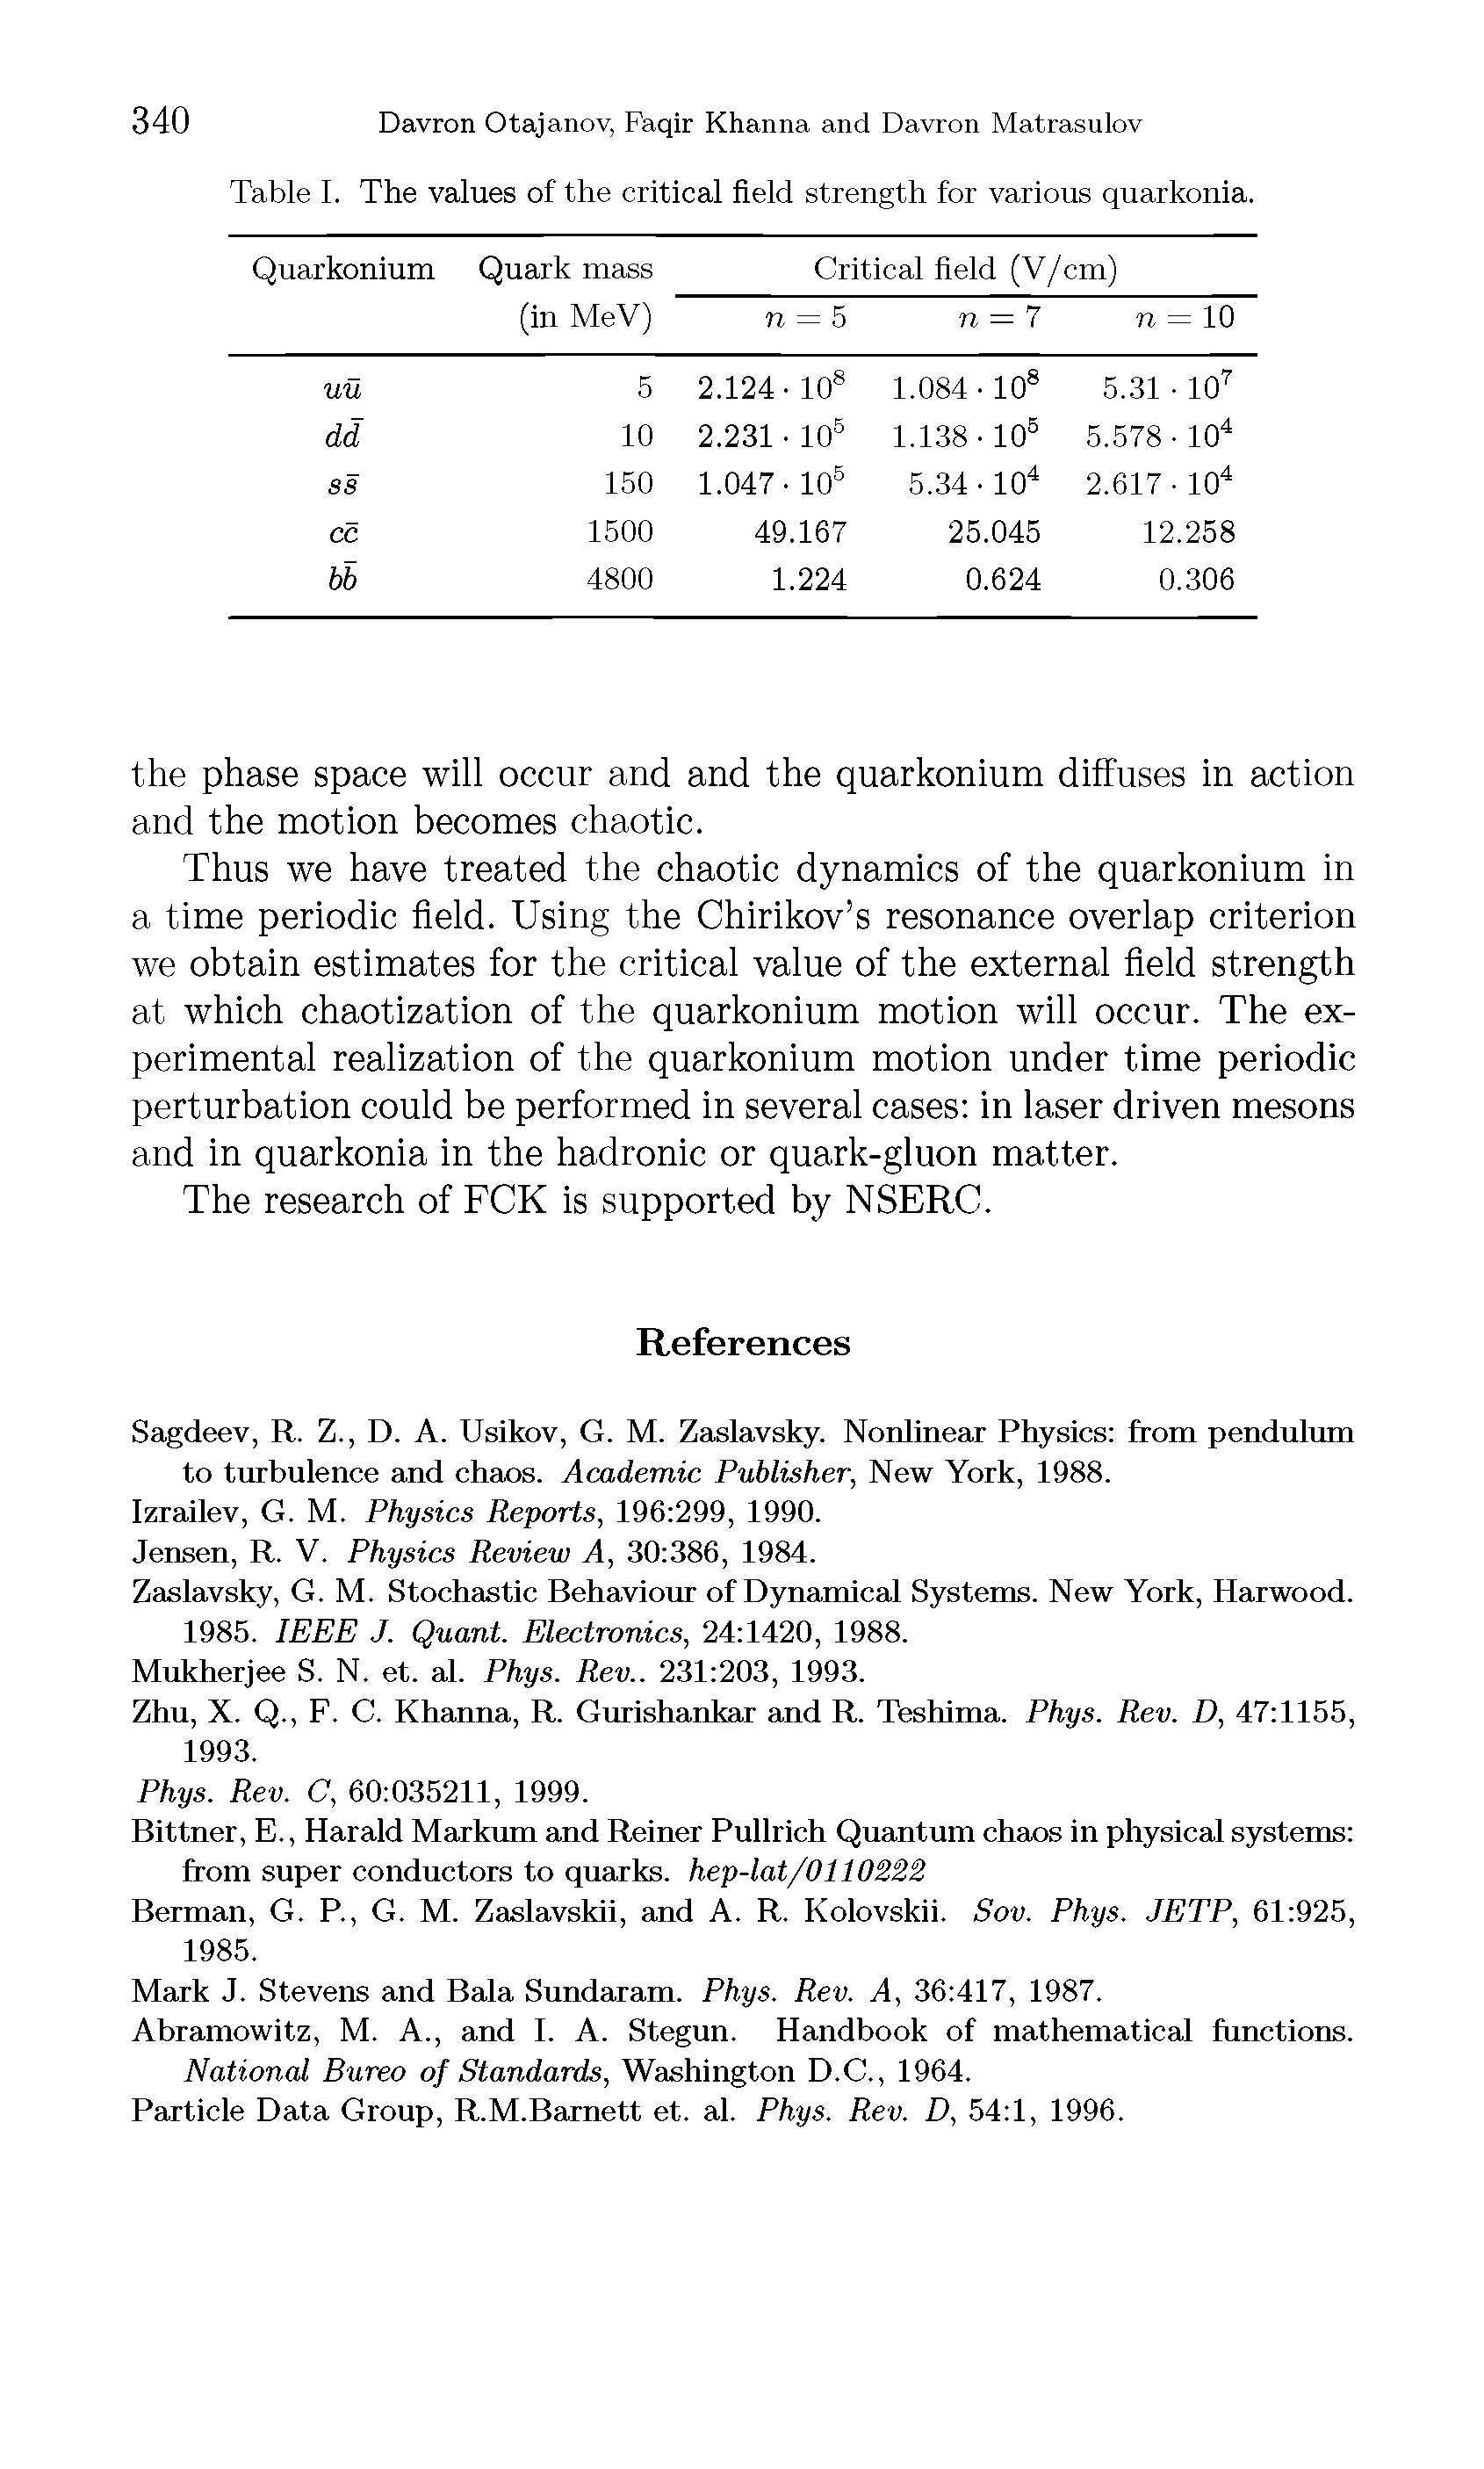 Table I. The values of the critical field strength for various quarkonia.